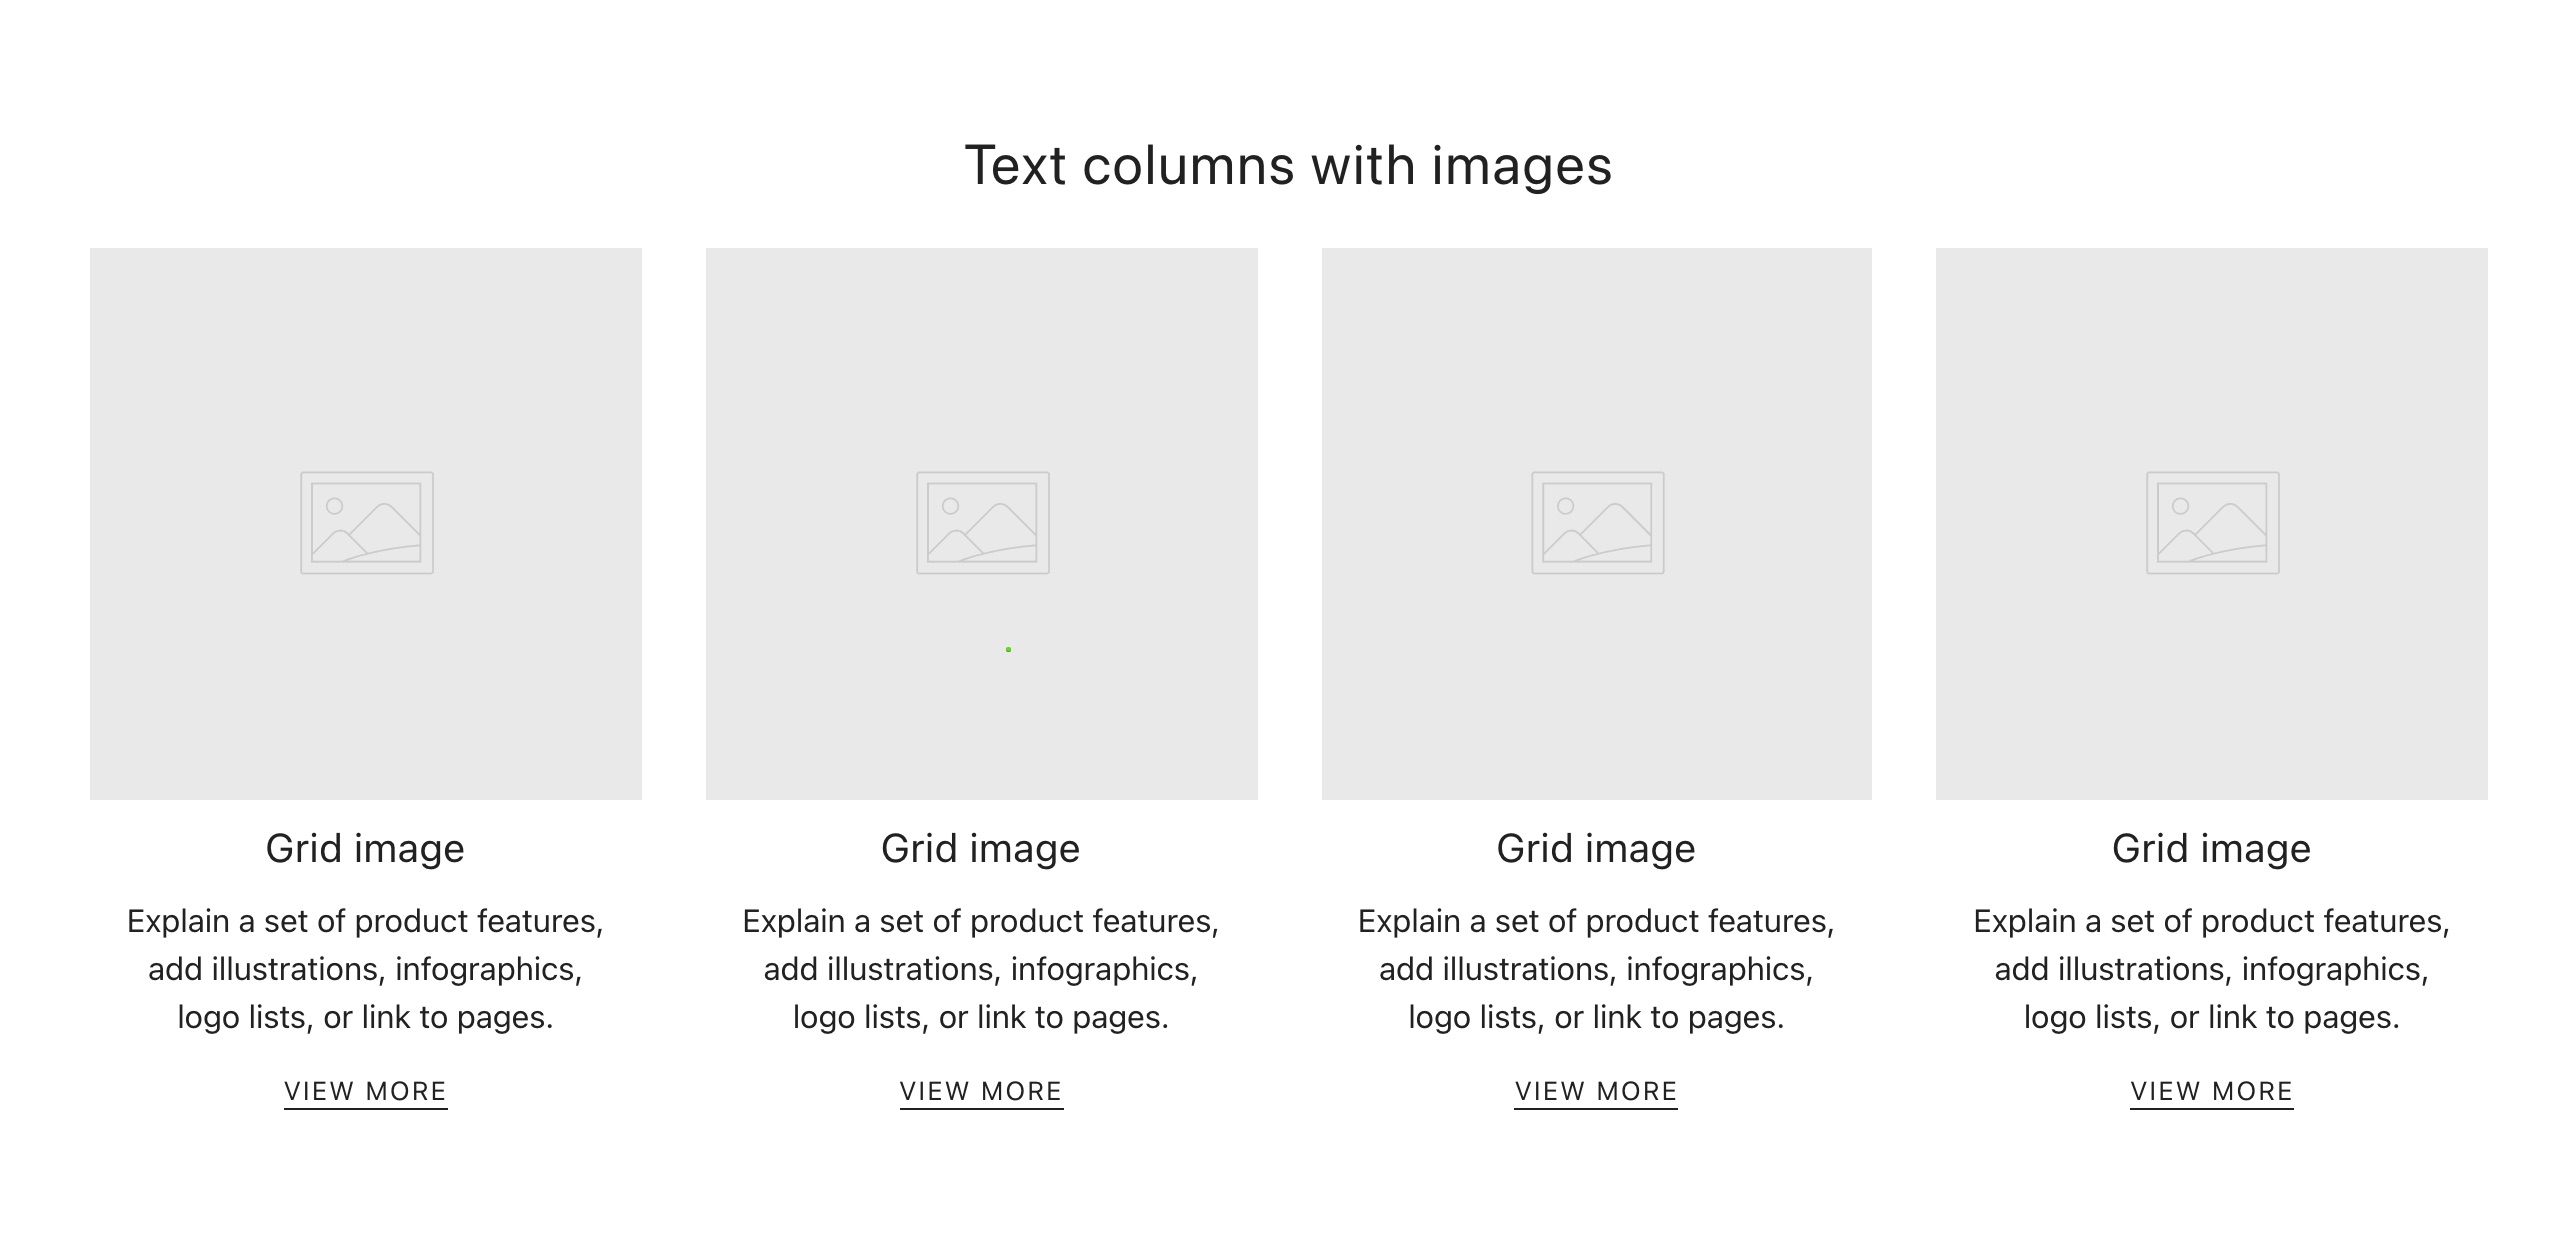 Text columns with images settings